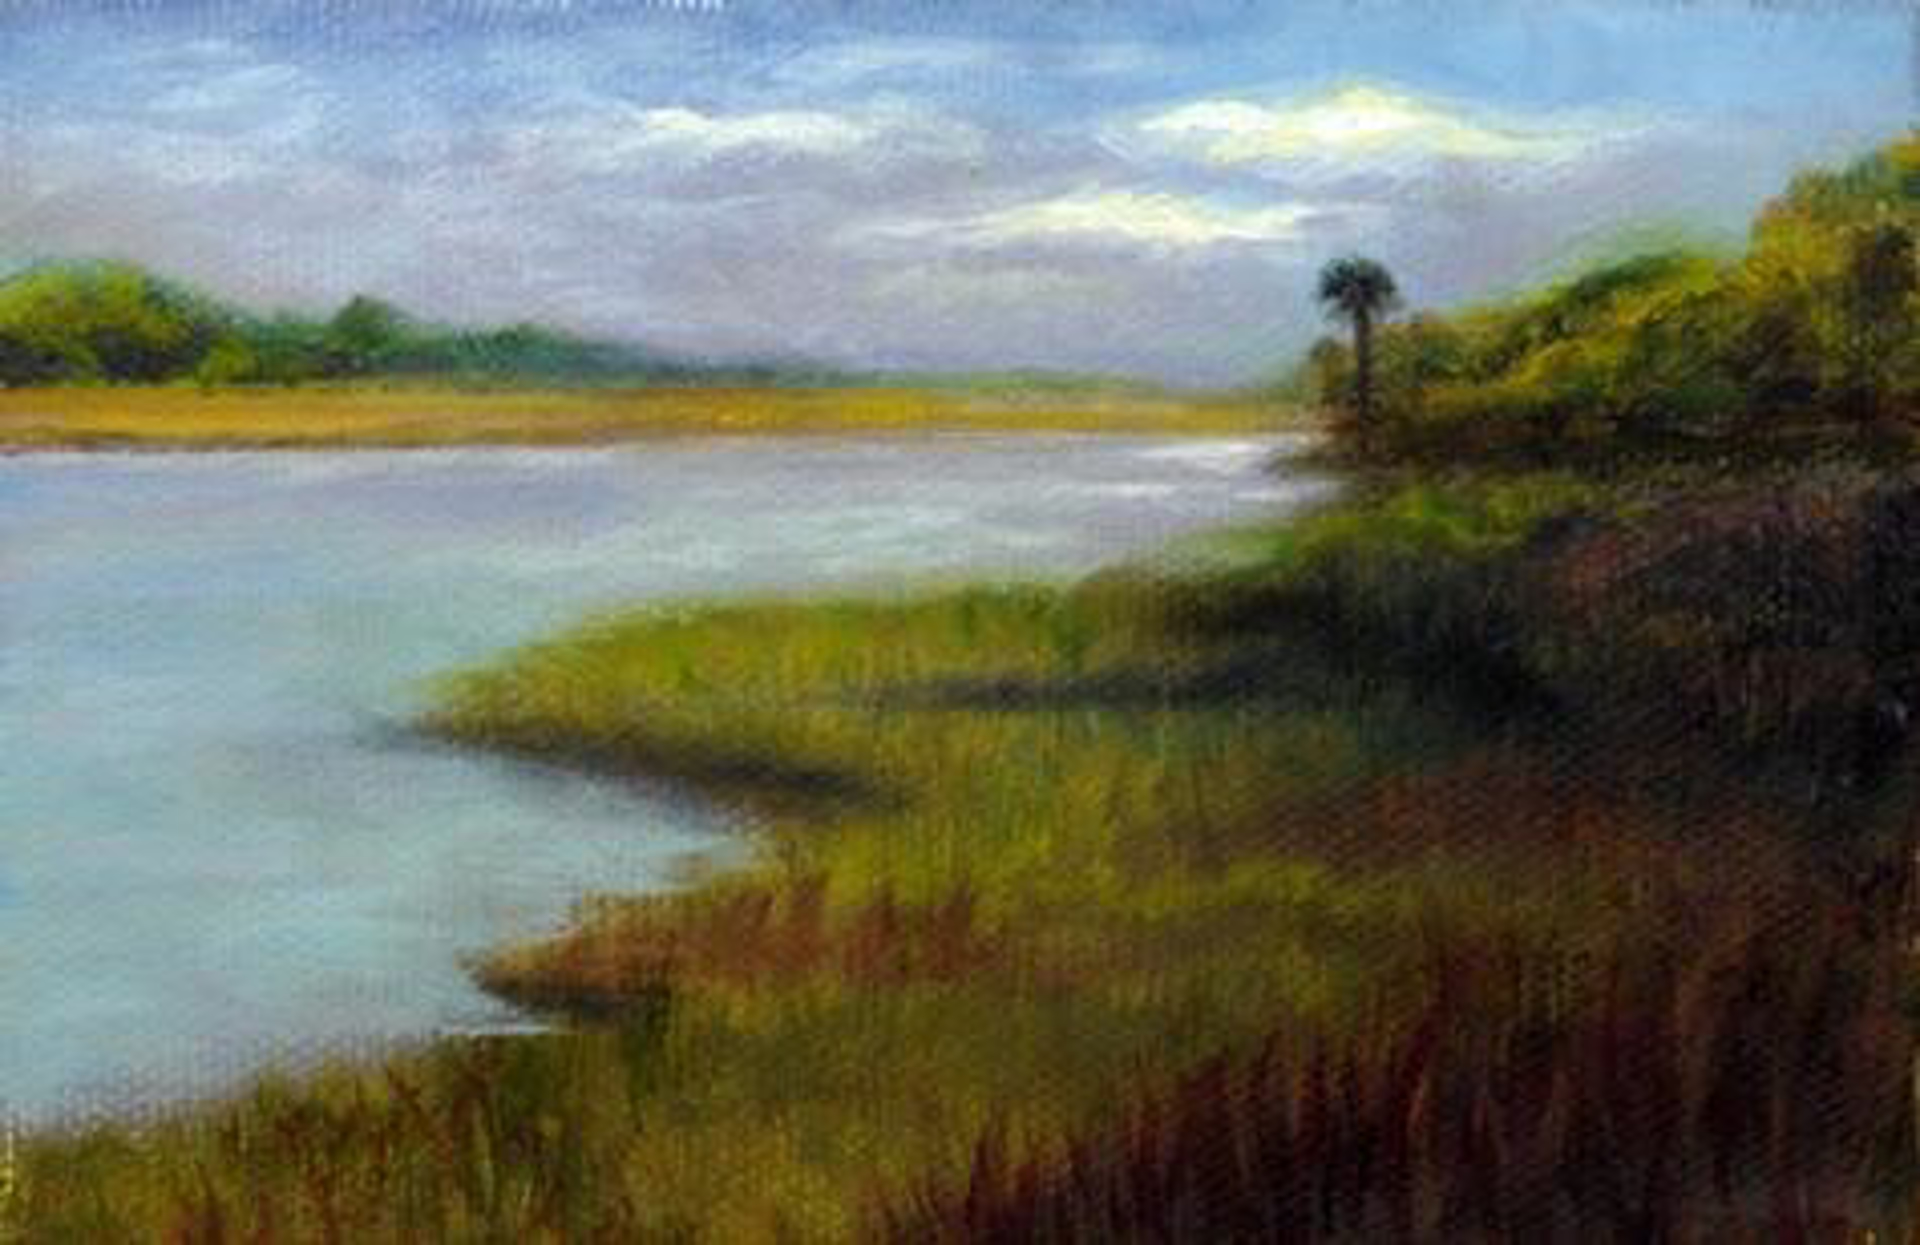 Low Country Triptych 1 by Brenda Orcutt, Giclee--Prints